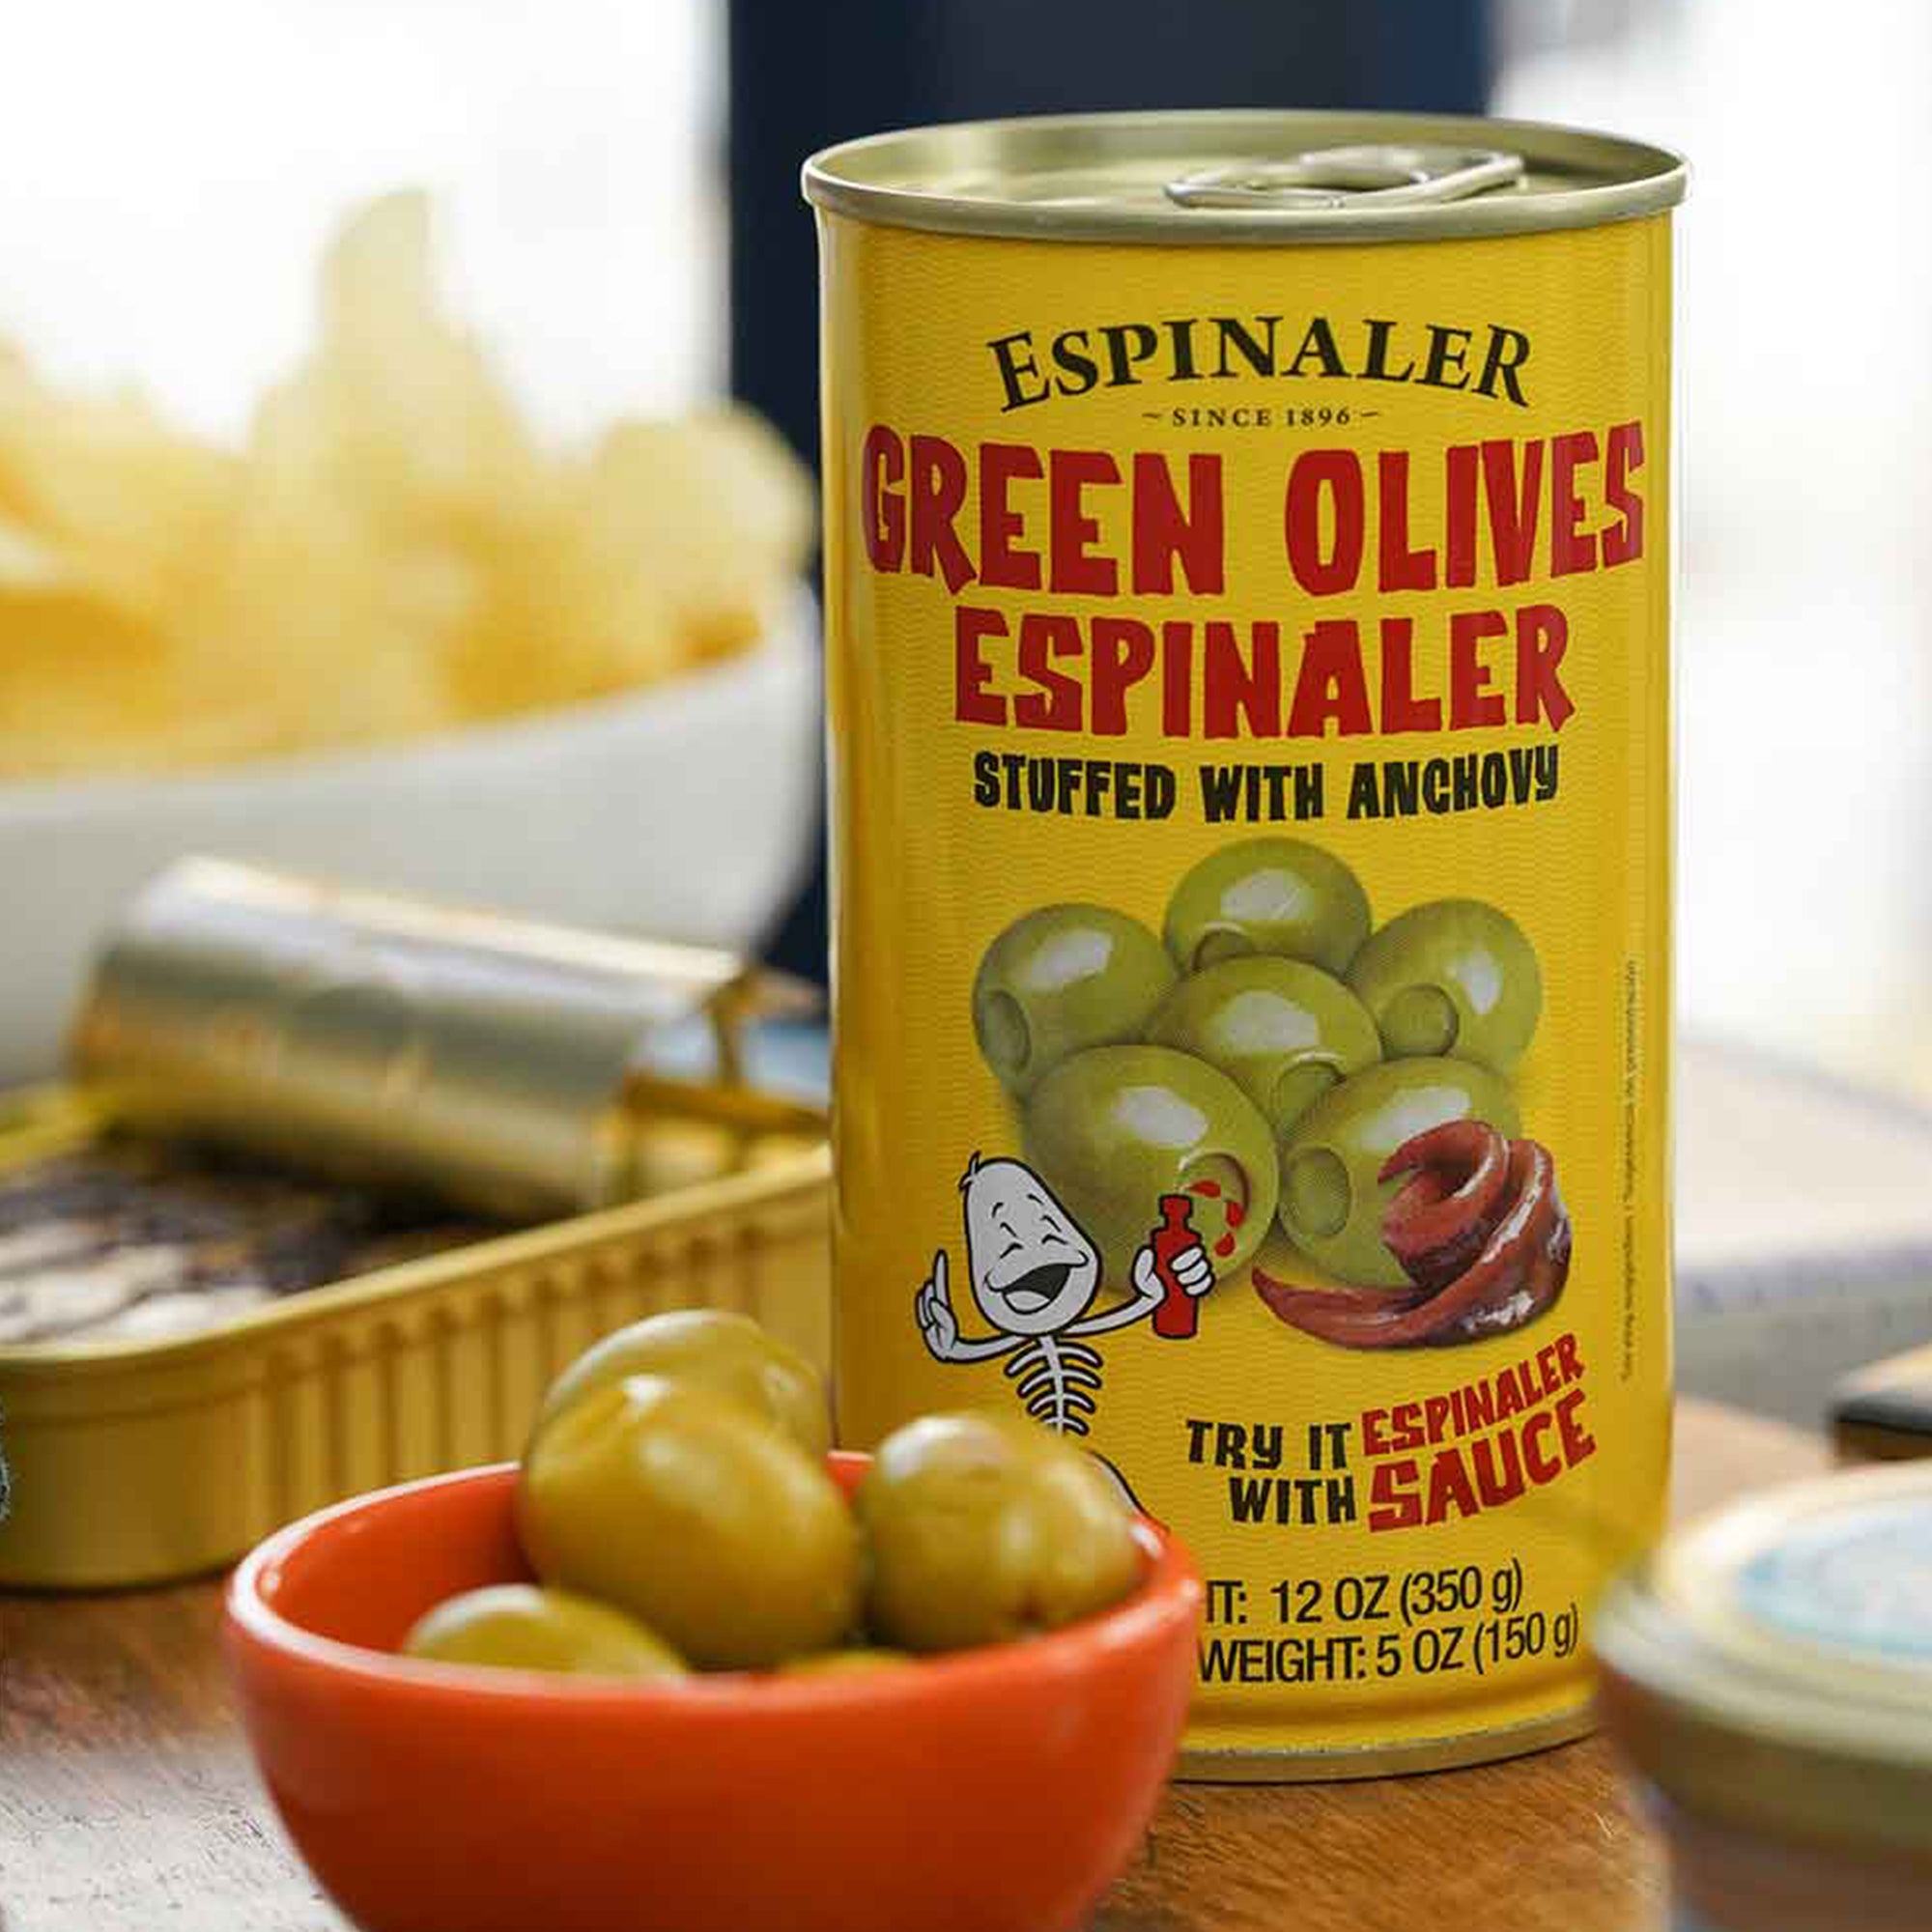 Espinaler Olives Stuffed with Anchovy